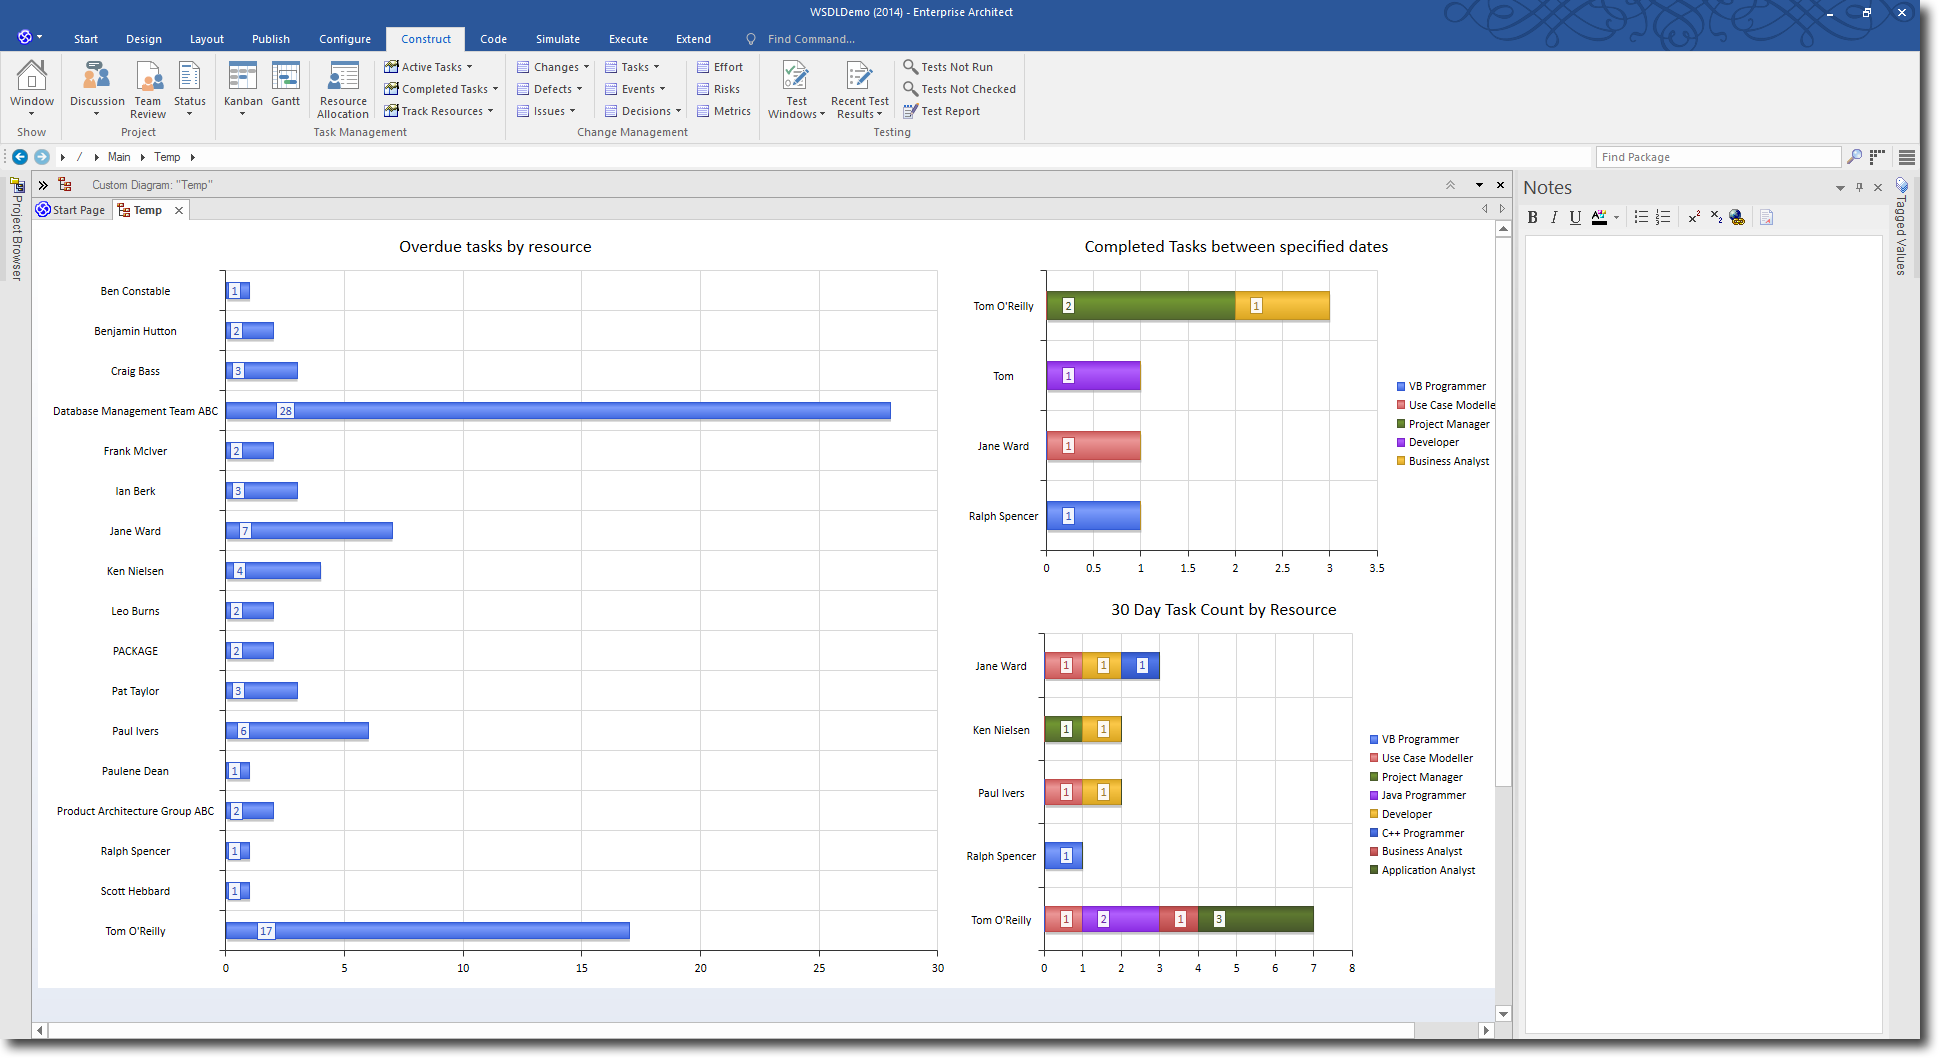 Enterprise Architect 13: New Searches and Charts